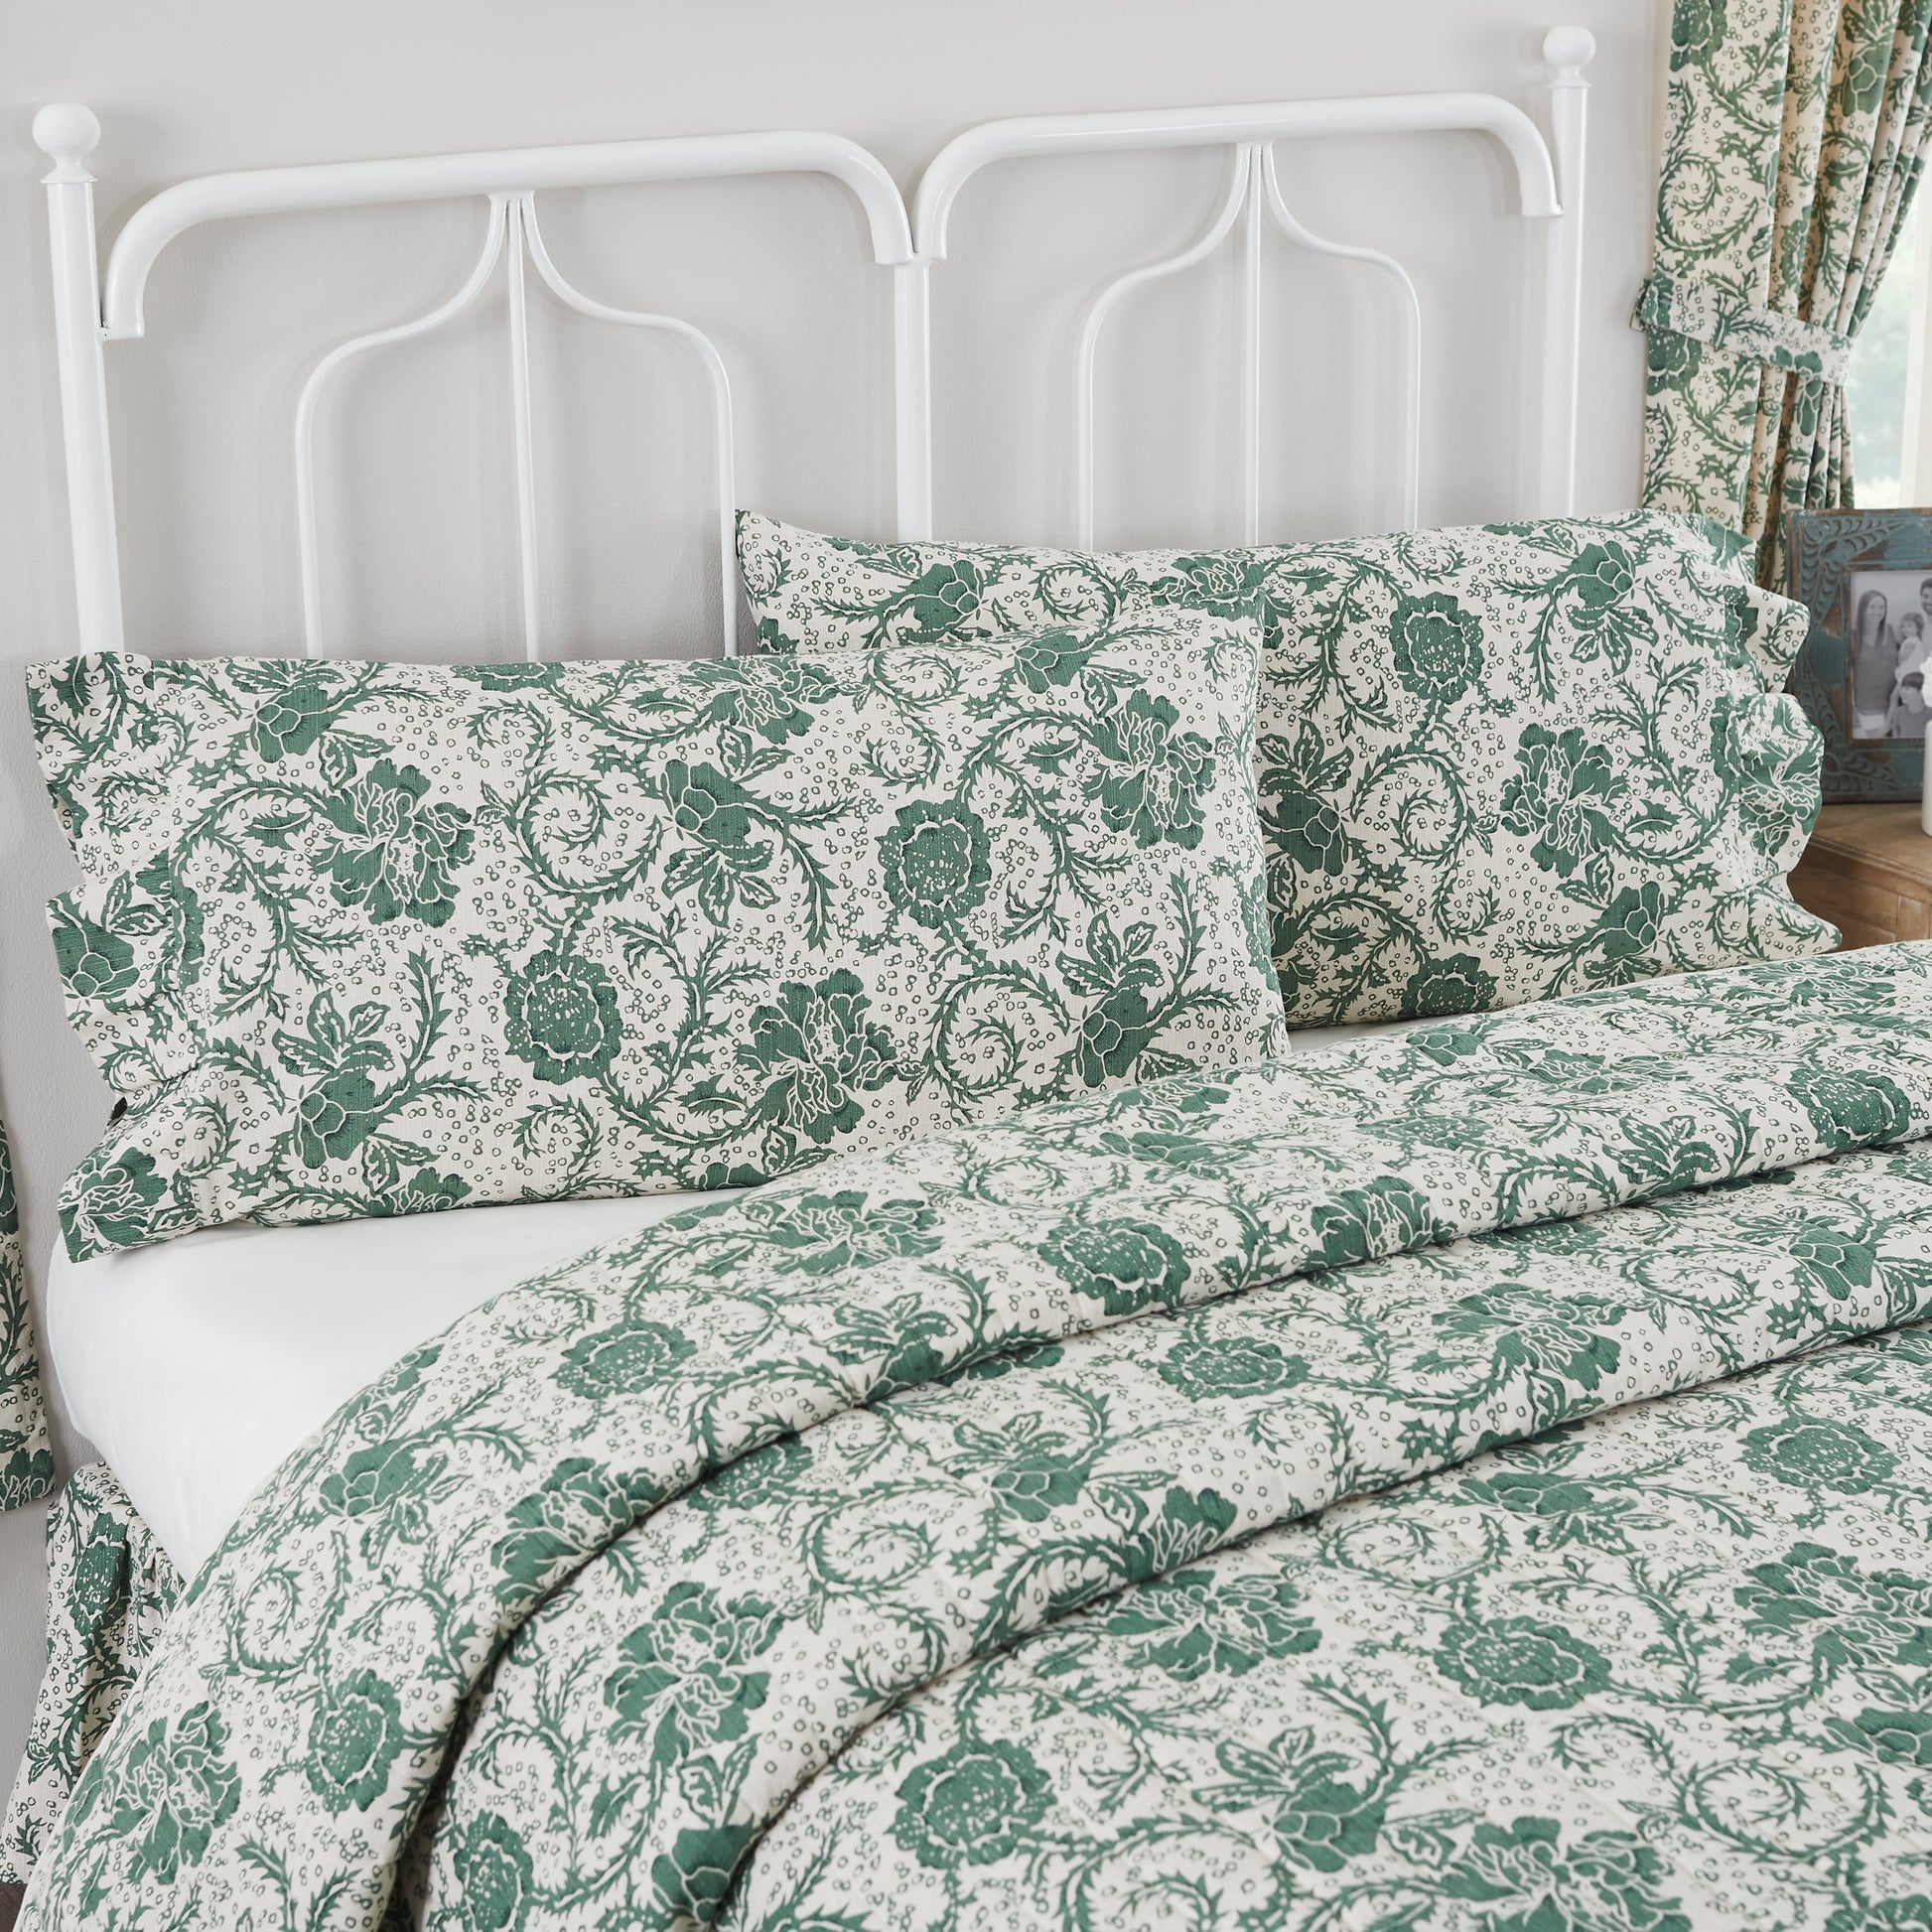 81220-Dorset-Green-Floral-Ruffled-King-Pillow-Case-Set-of-2-21x36-4-image-3